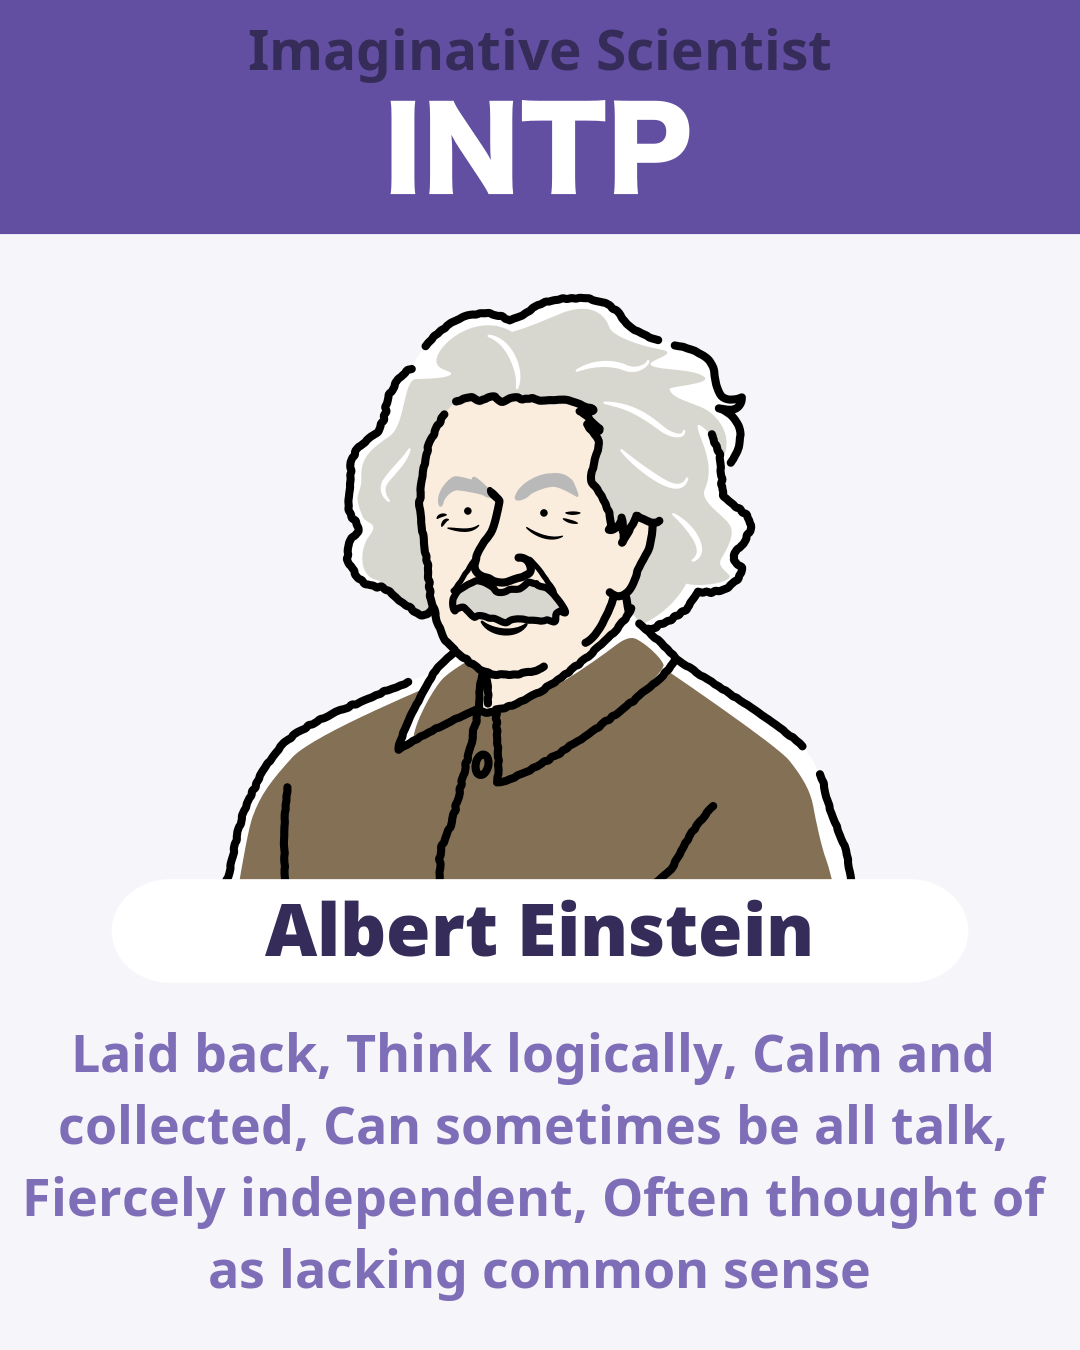 INTP villains | Intp personality, Intp personality type, Personality types